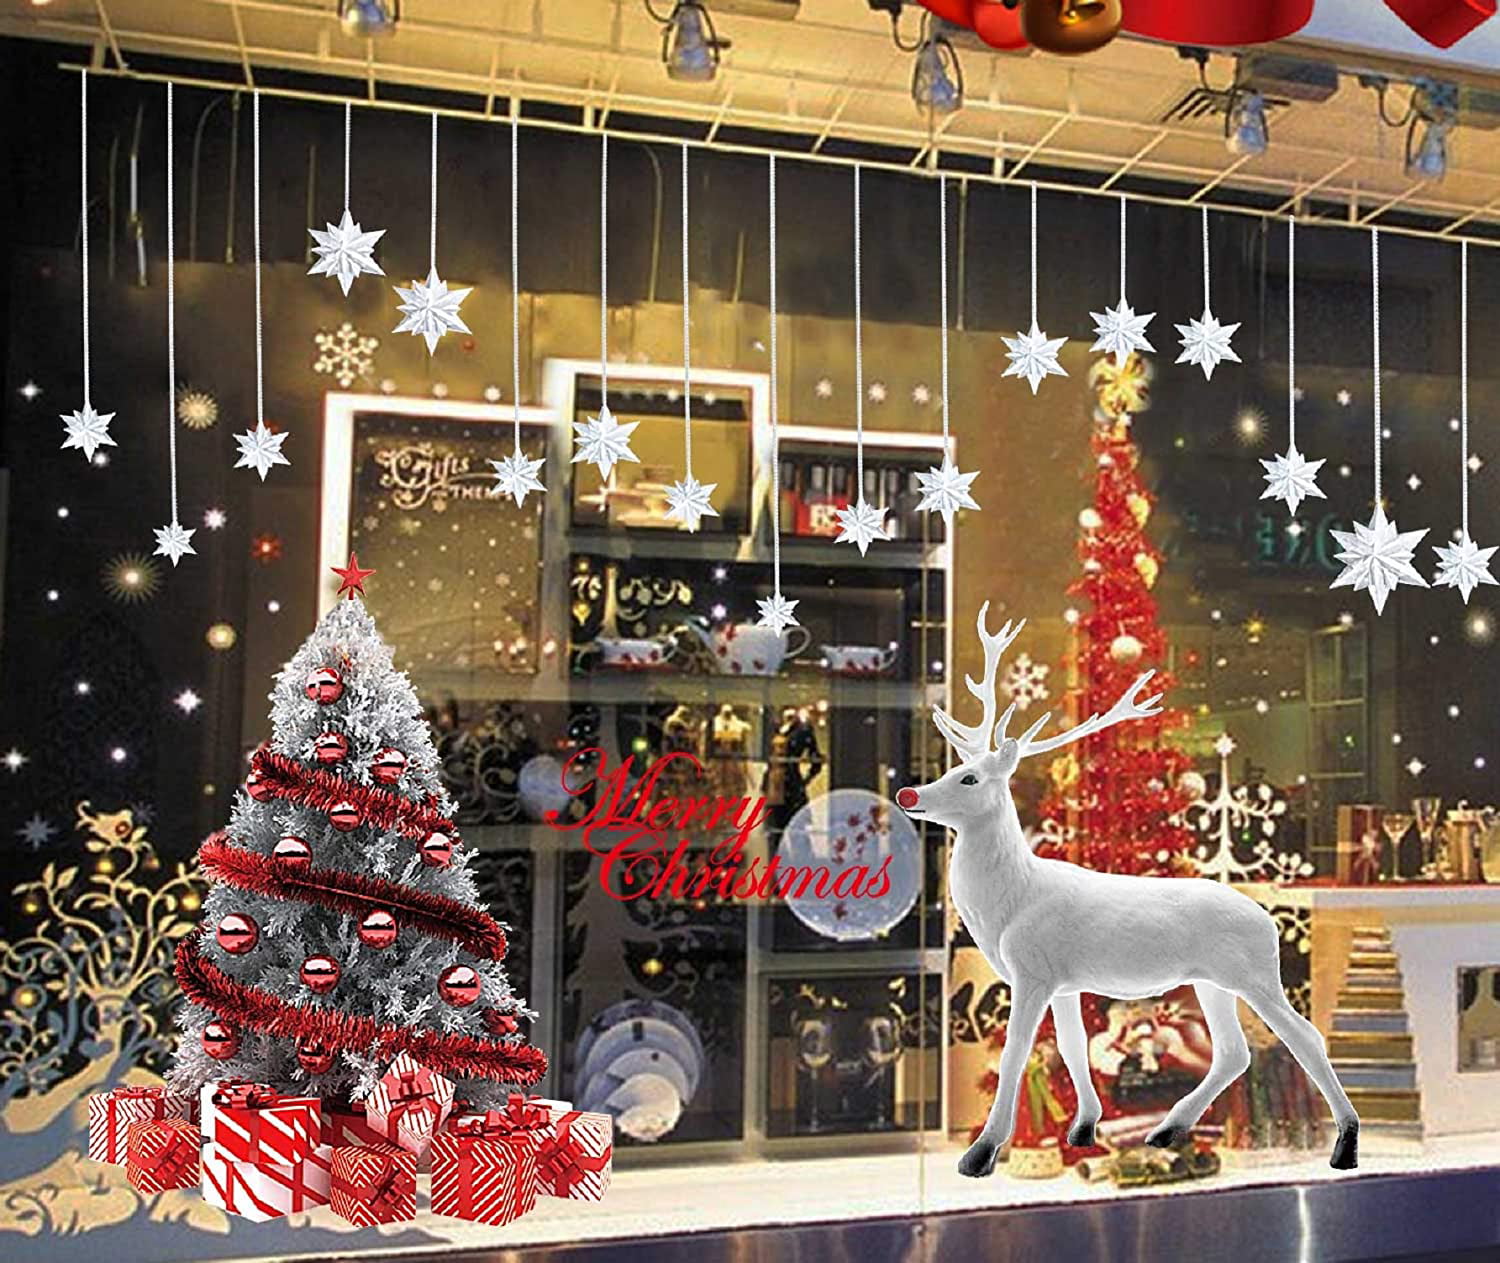 Merry Christmas Reindeer's Wall Stickers Decoration Winter Shop Window Decal 